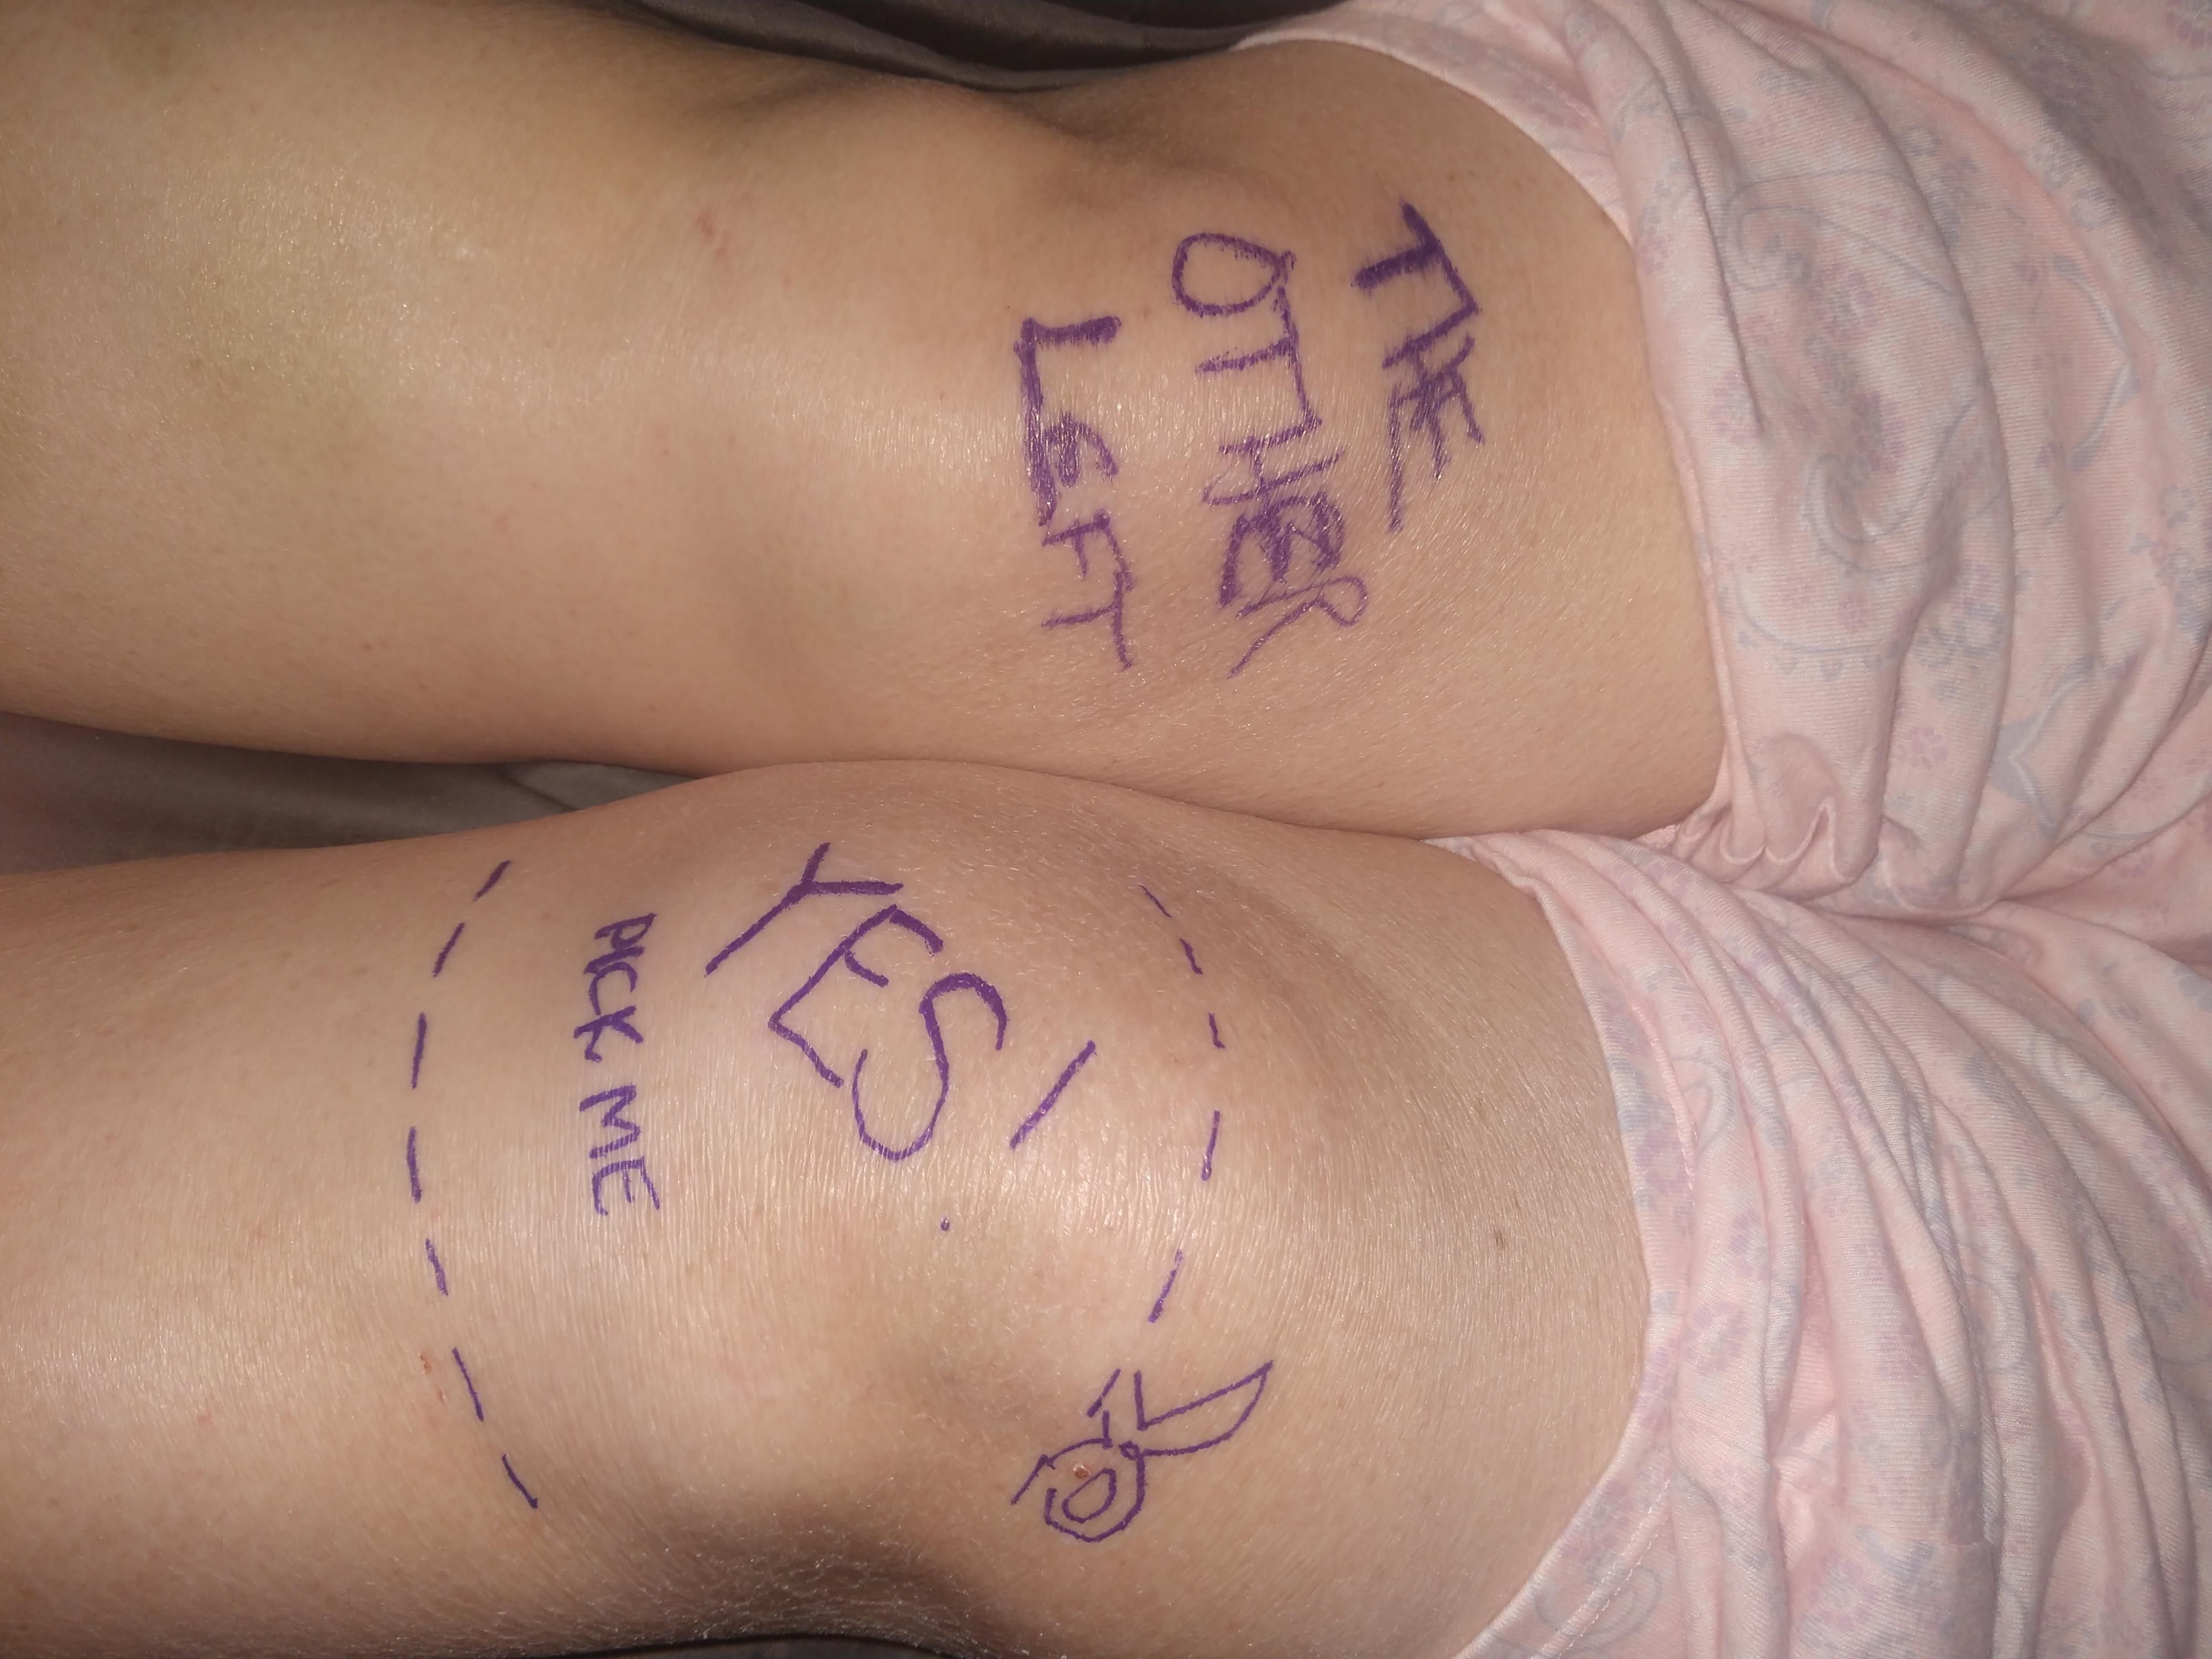 Doc told us to write yes on the knee to replace before surgery. We took it further.